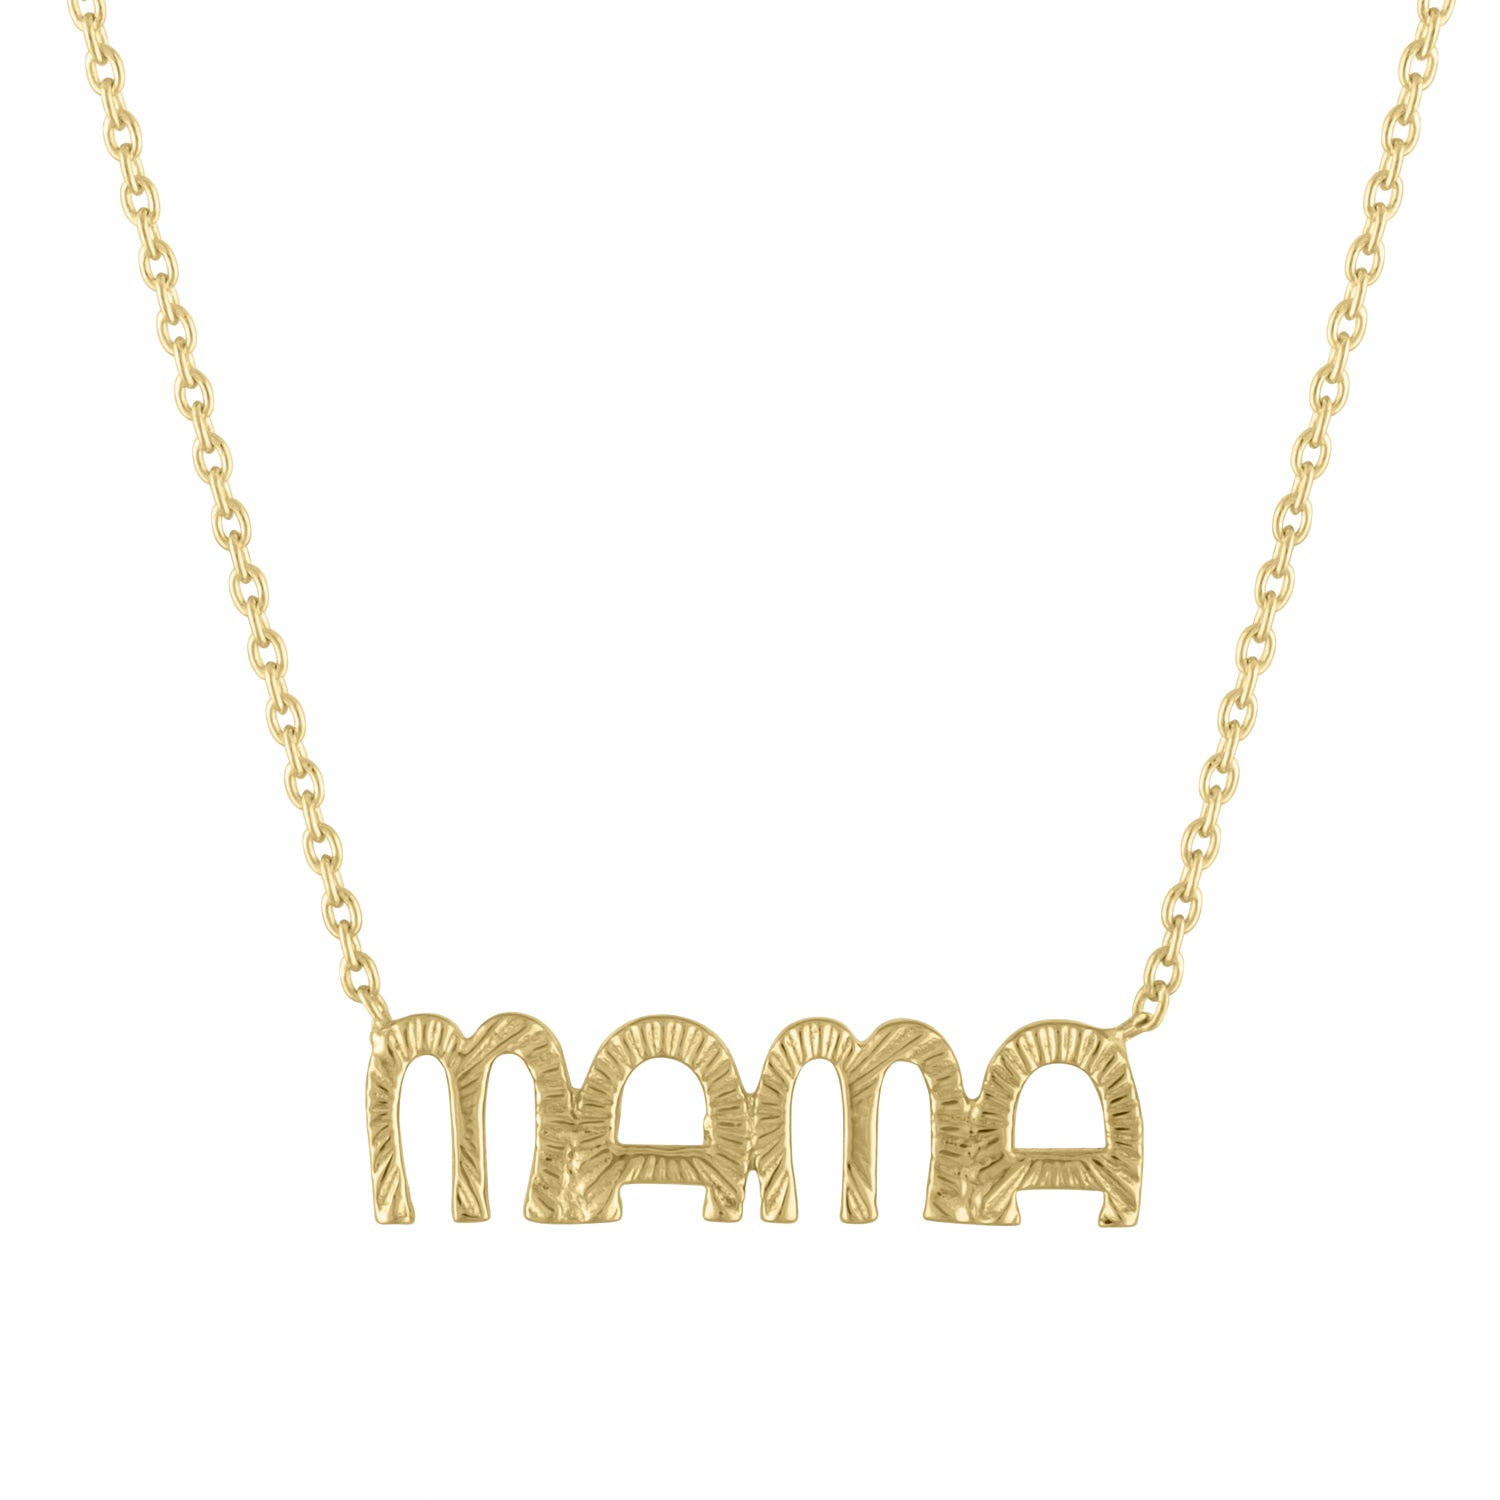 Yellow gold mama necklace with fluting.